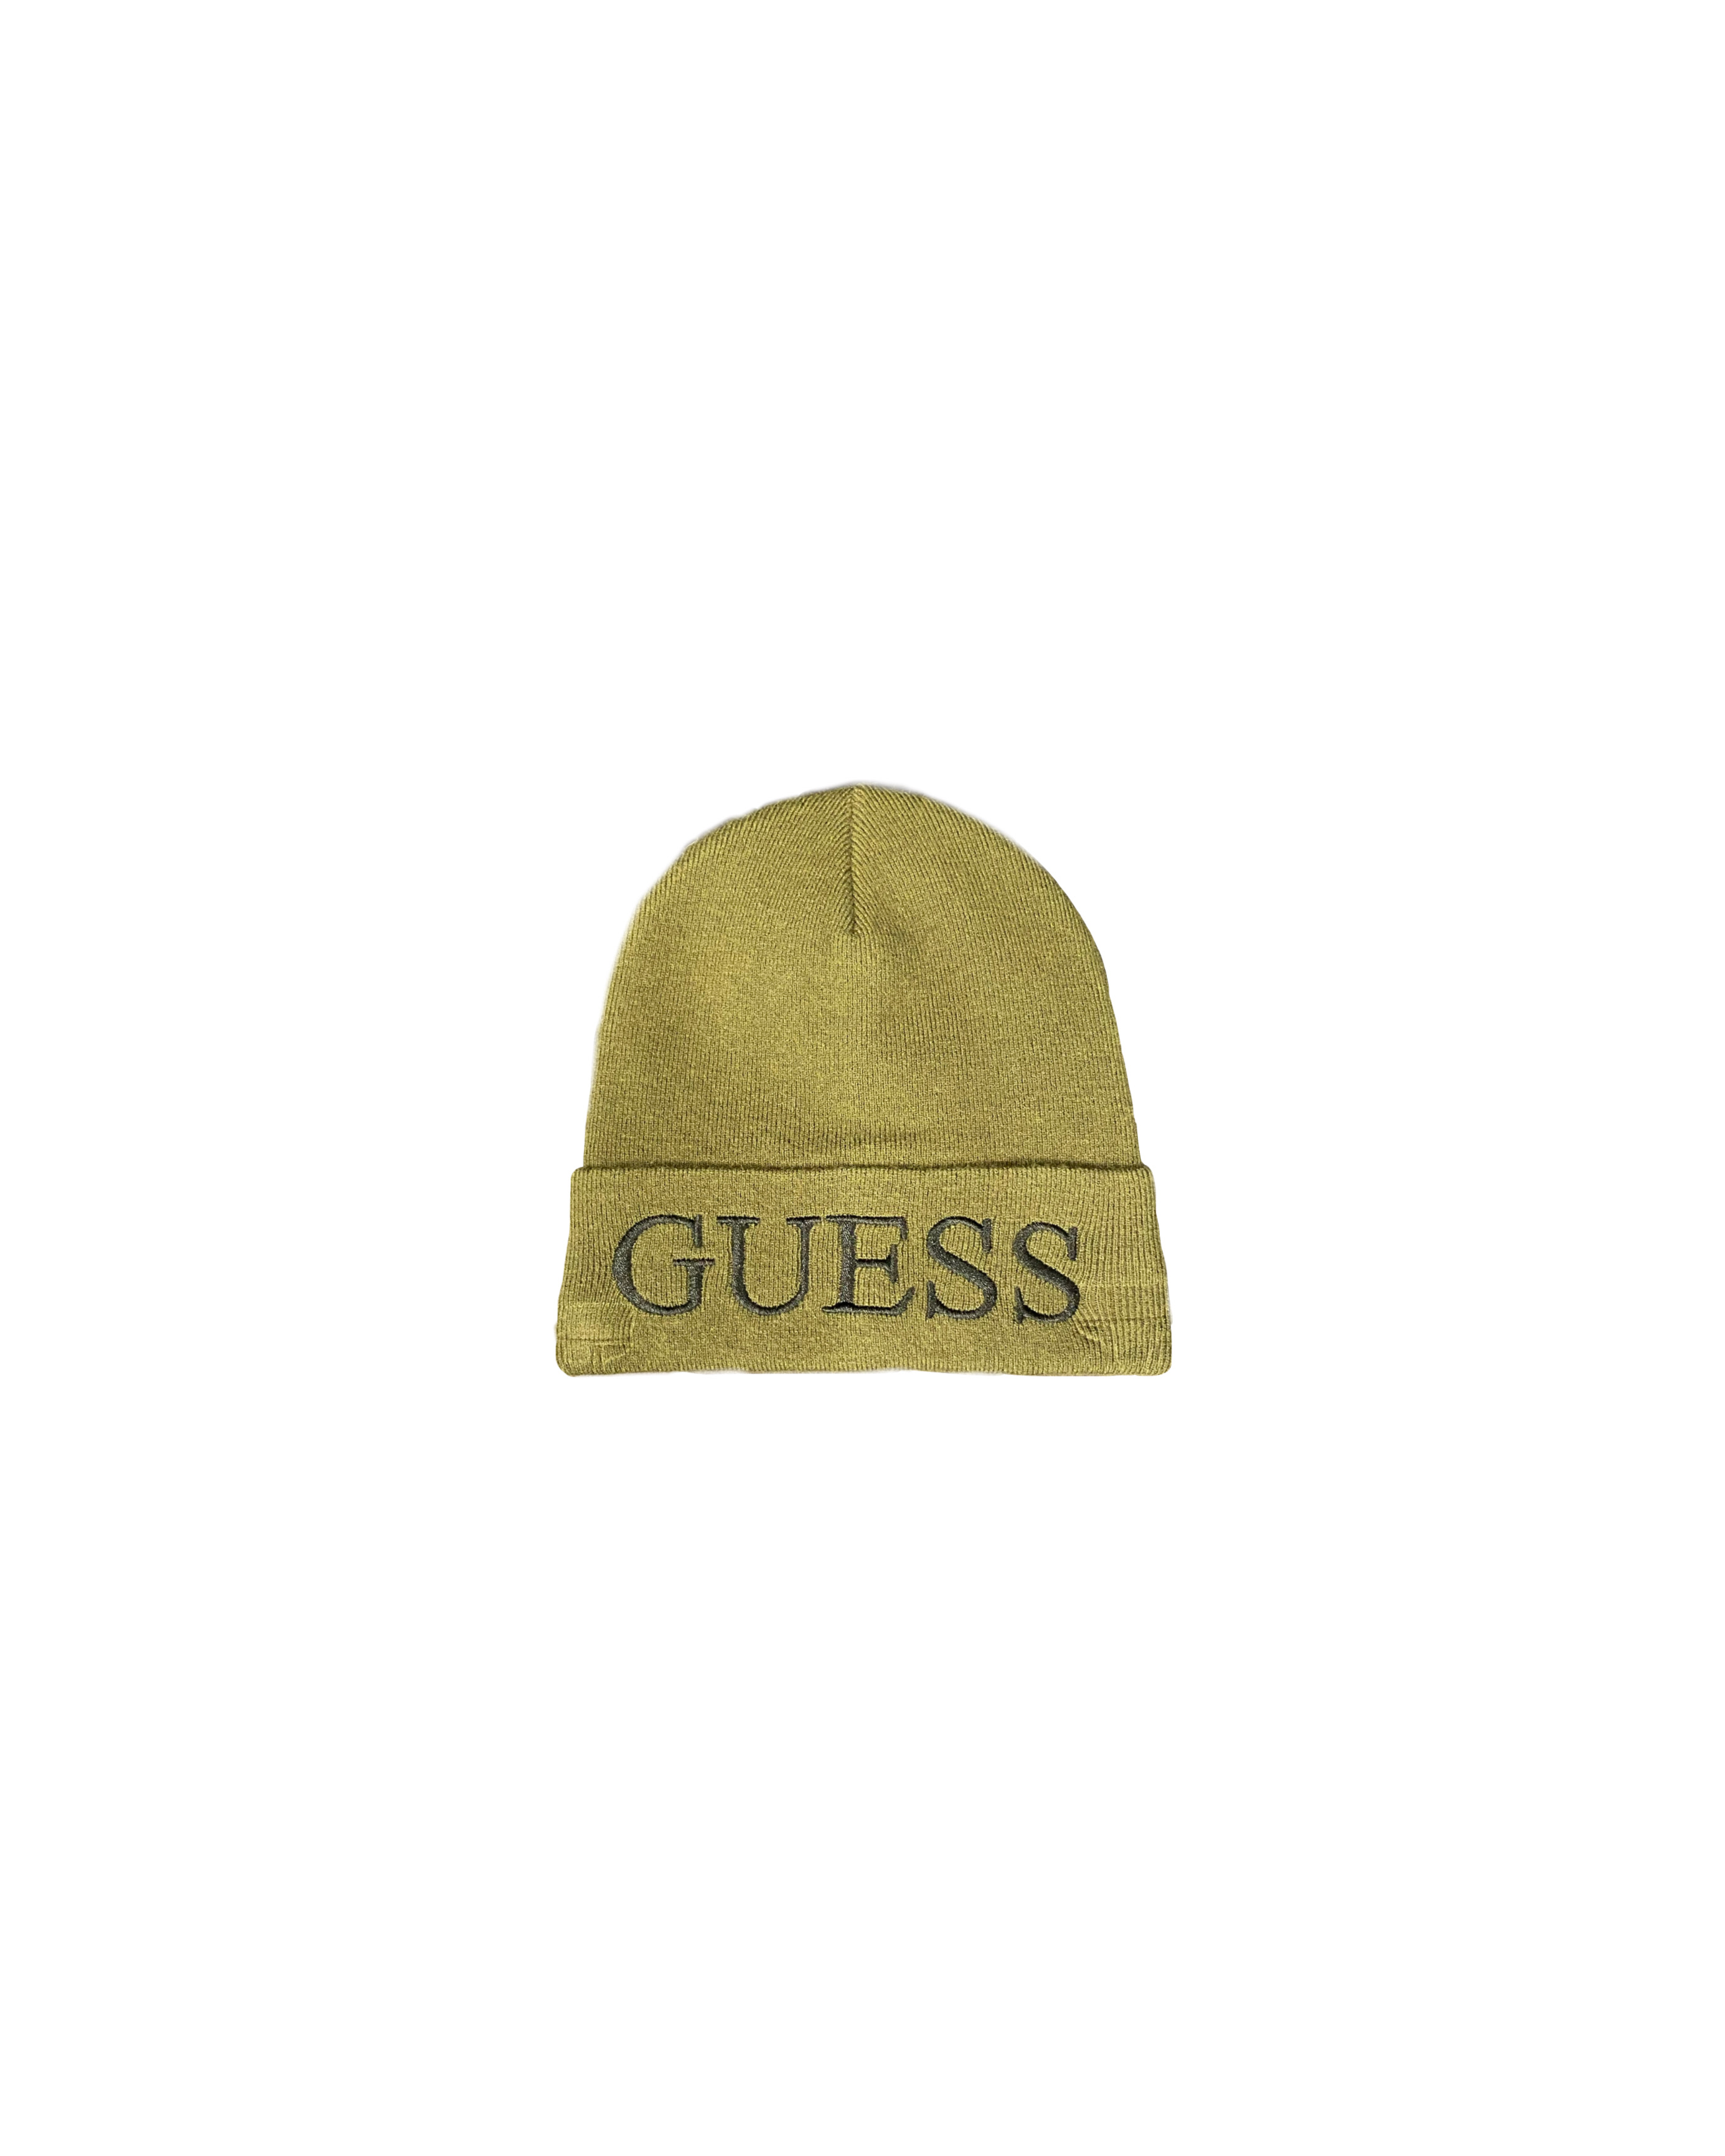 GUESS CAPPELLO AM8858WOL01 - MLT UOMO